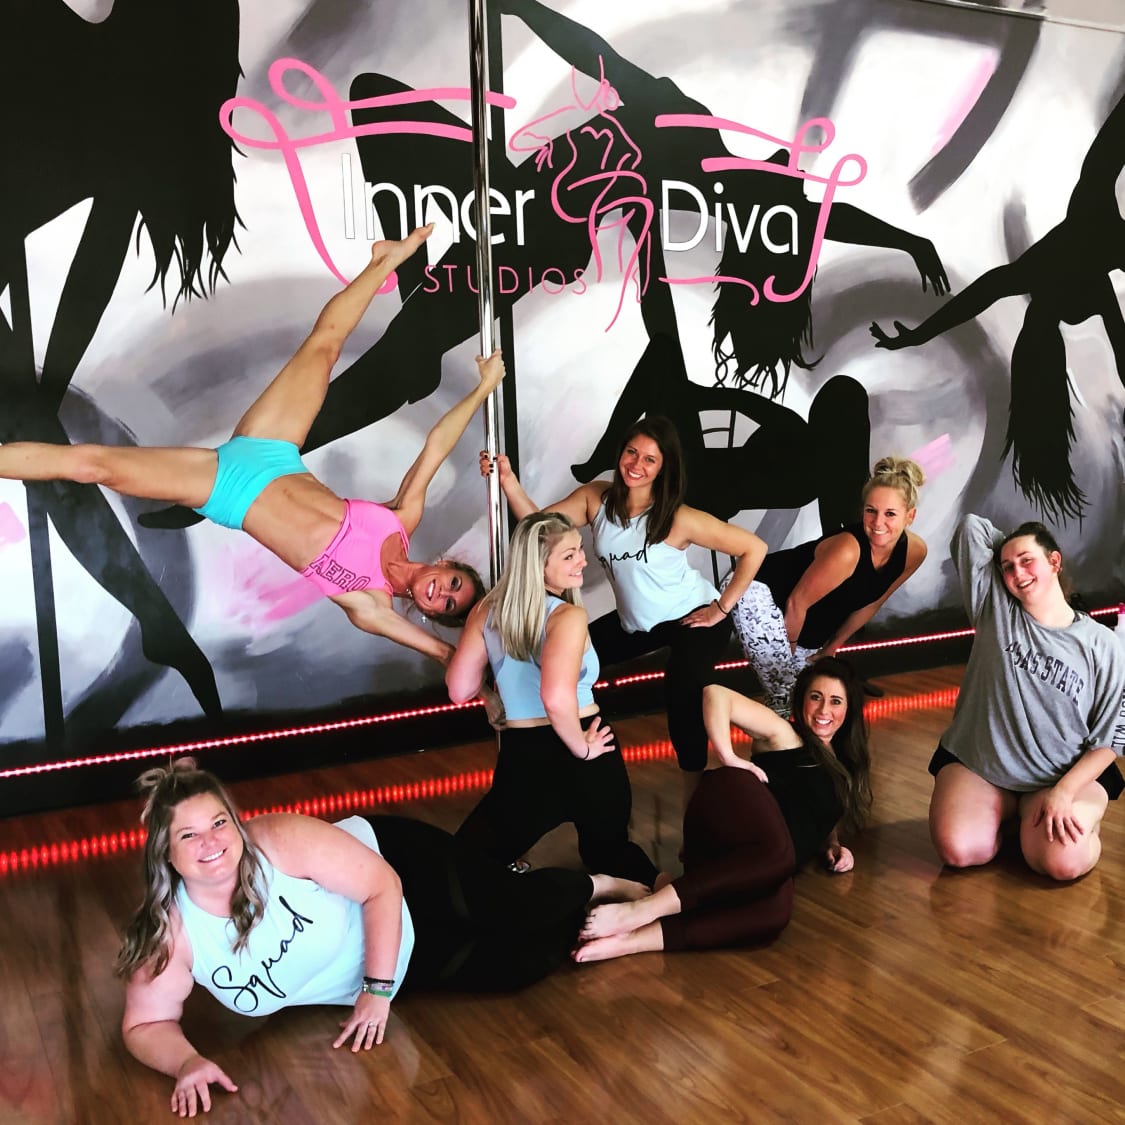 Inner Diva Studios: Read Reviews and Book Classes on